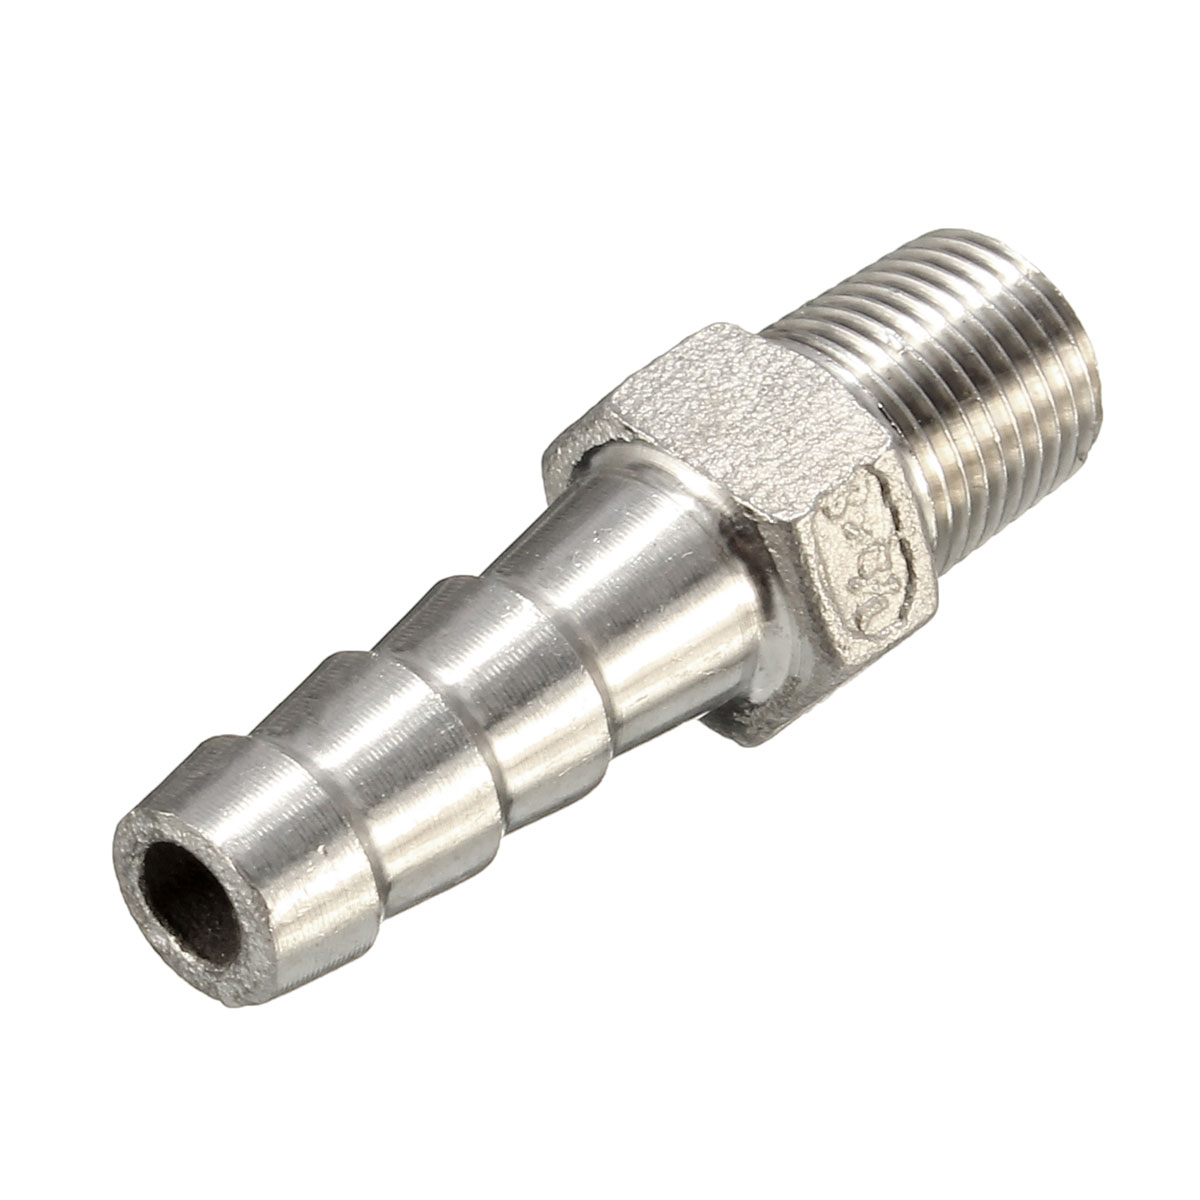 18-Inch-Stainless-Steel-Hose-Tails-Barb-Connector-BSPT-Thread-Pipe-Adapter-1716150-7